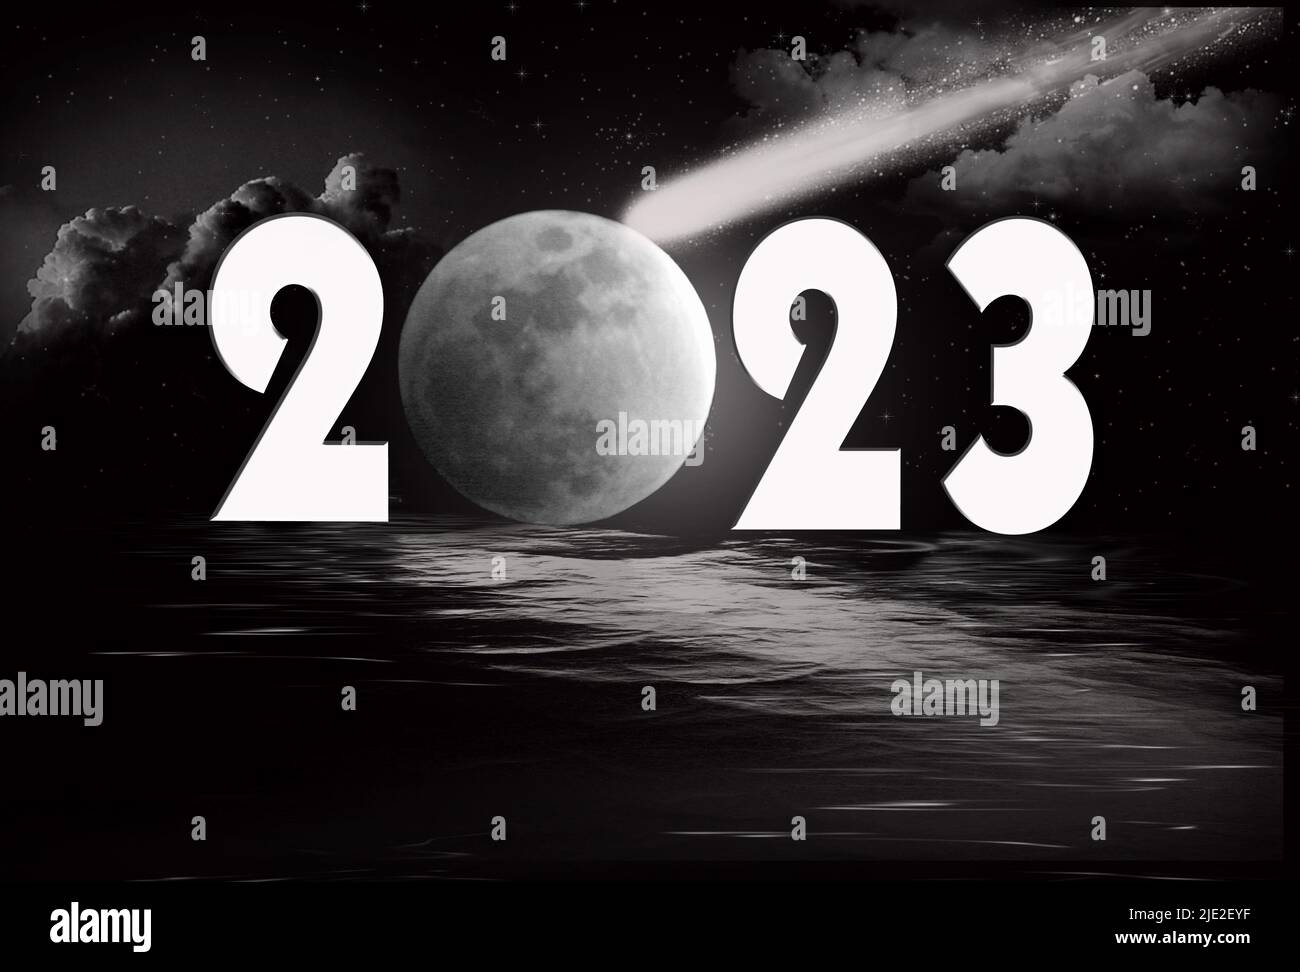 New Year 2023 full moon and comet with black water reflection Stock Photo